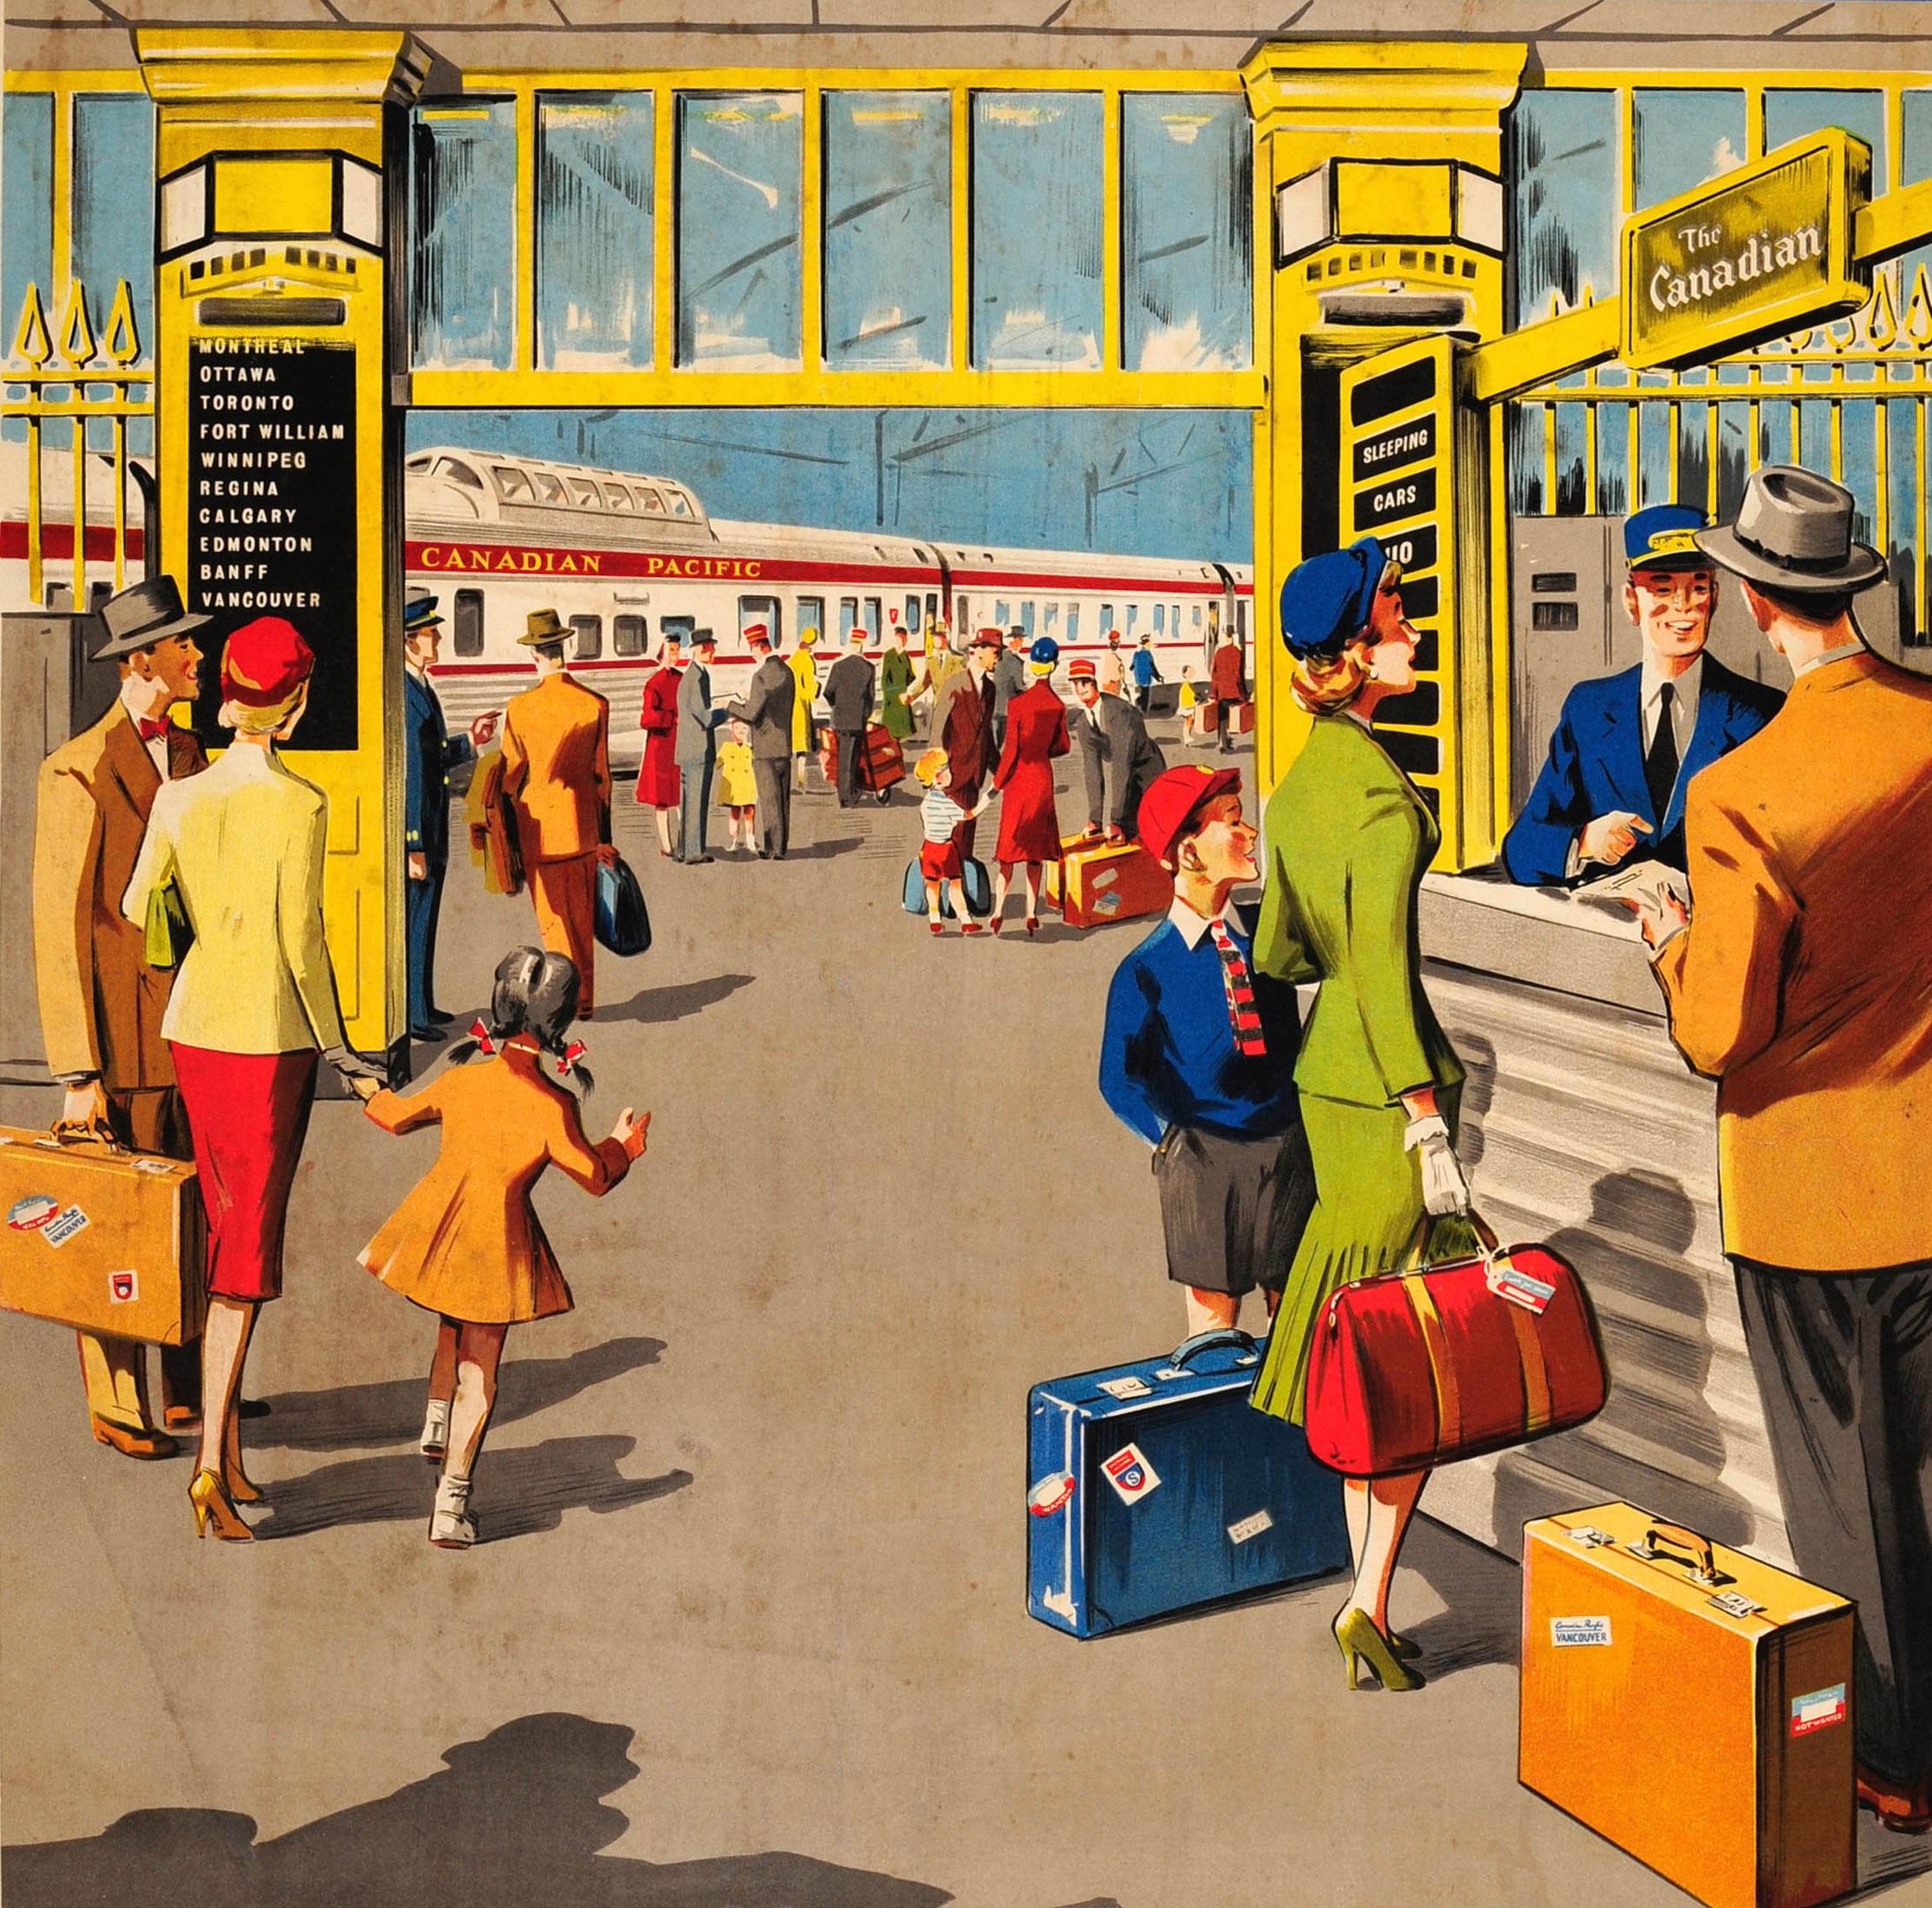 Original vintage travel advertising poster: Travel Canadian Pacific in Canada comfortably and quickly to your destination. Colorful illustration of a train station busy with smartly dressed people with their bags waiting for their trains, families